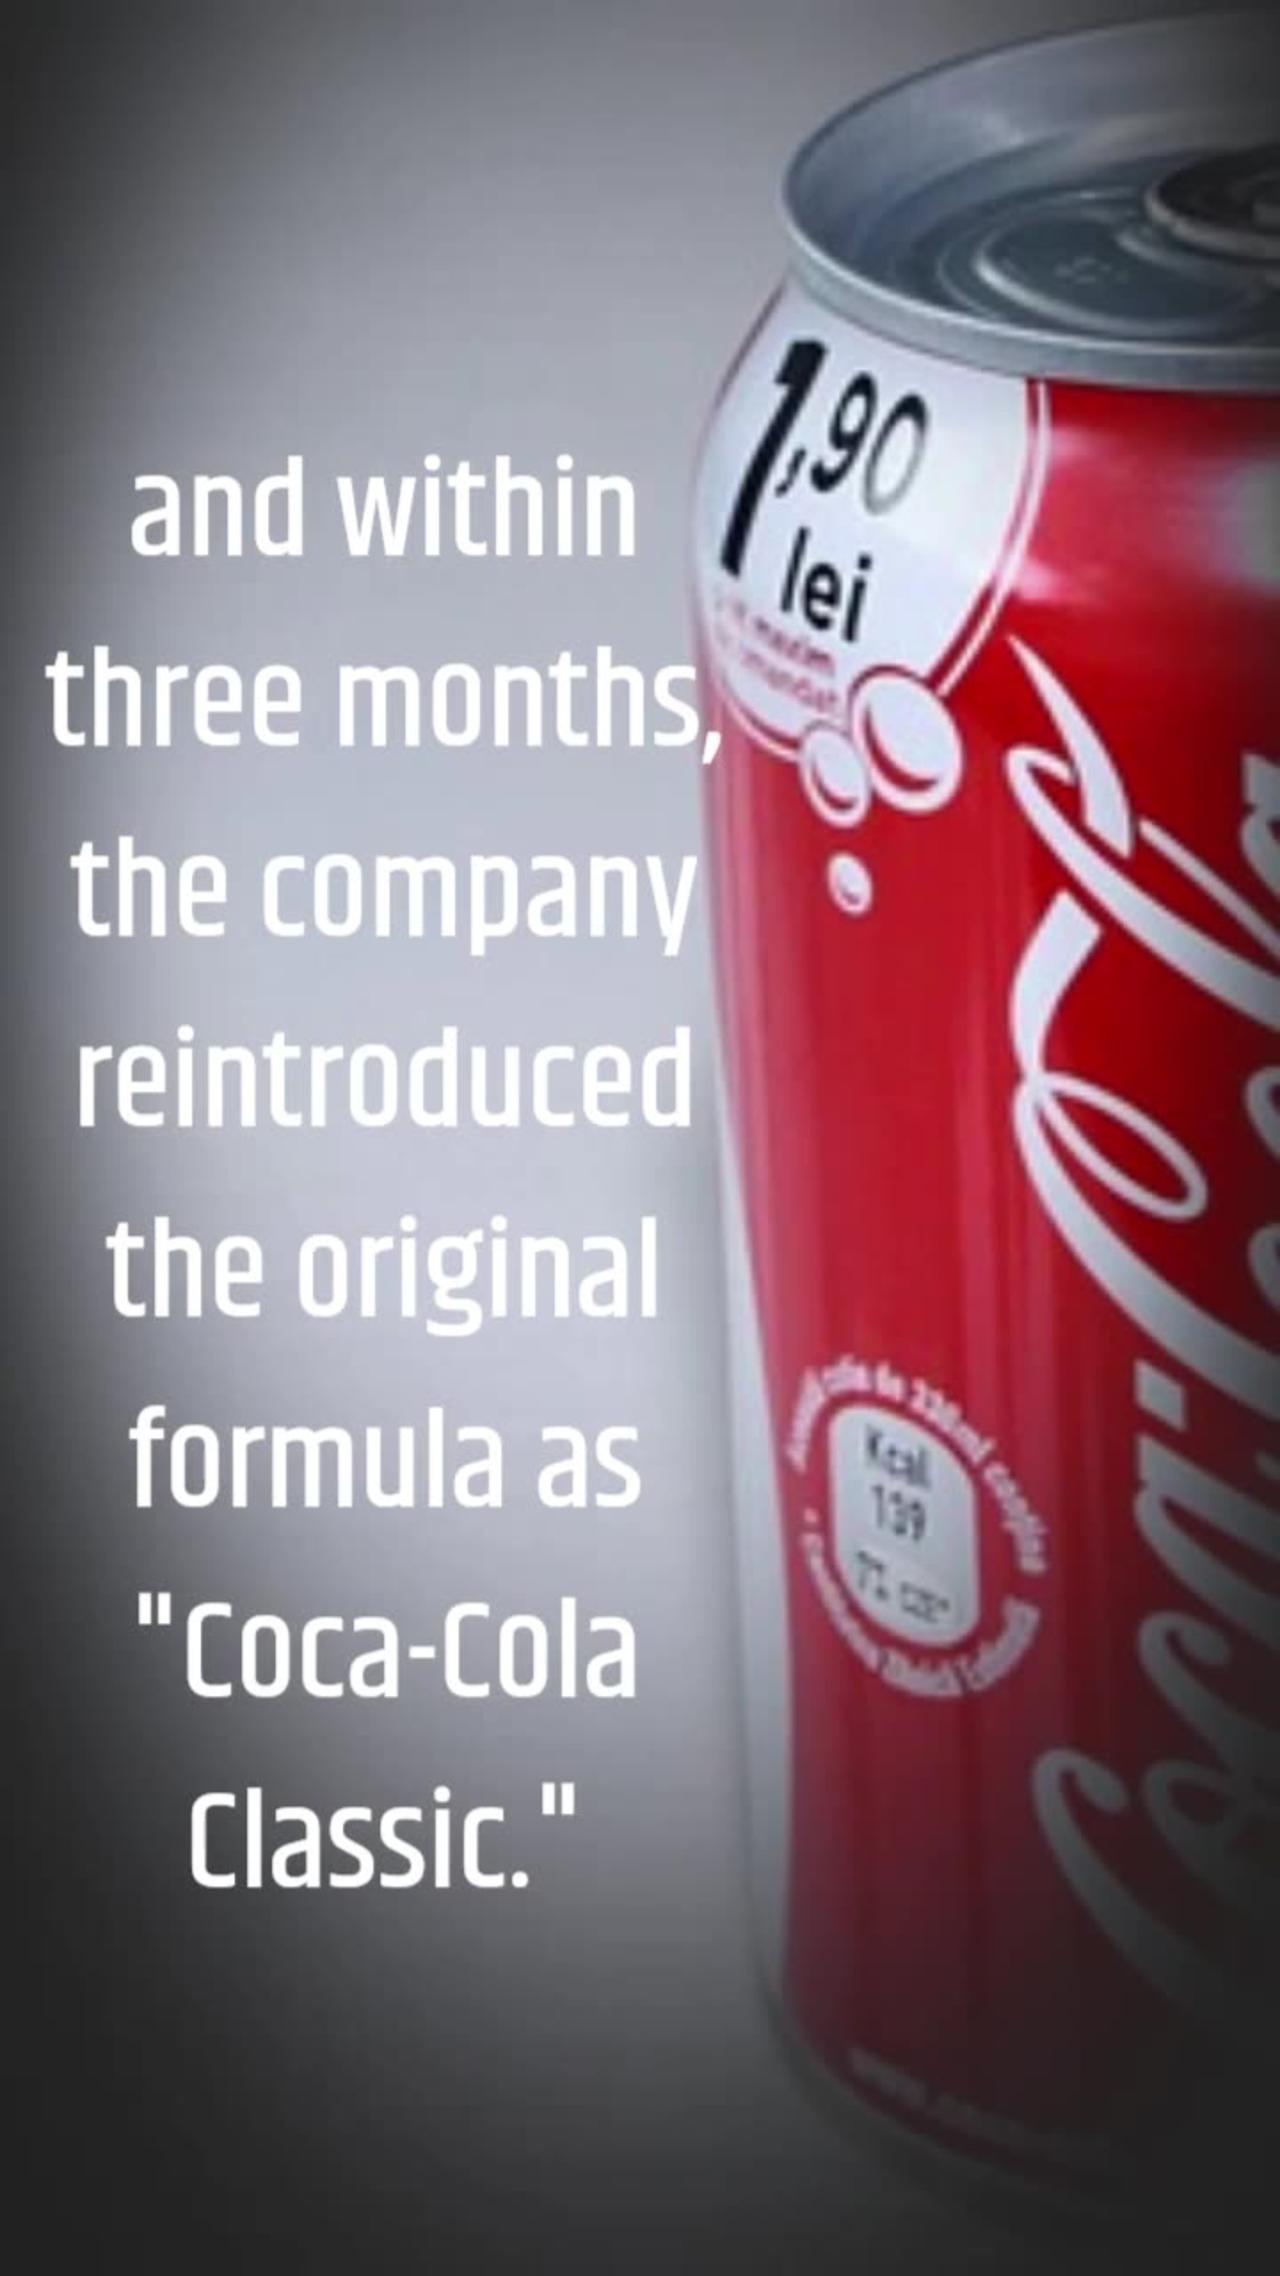 Facts About Coca-Cola You Probably Didn't Know.